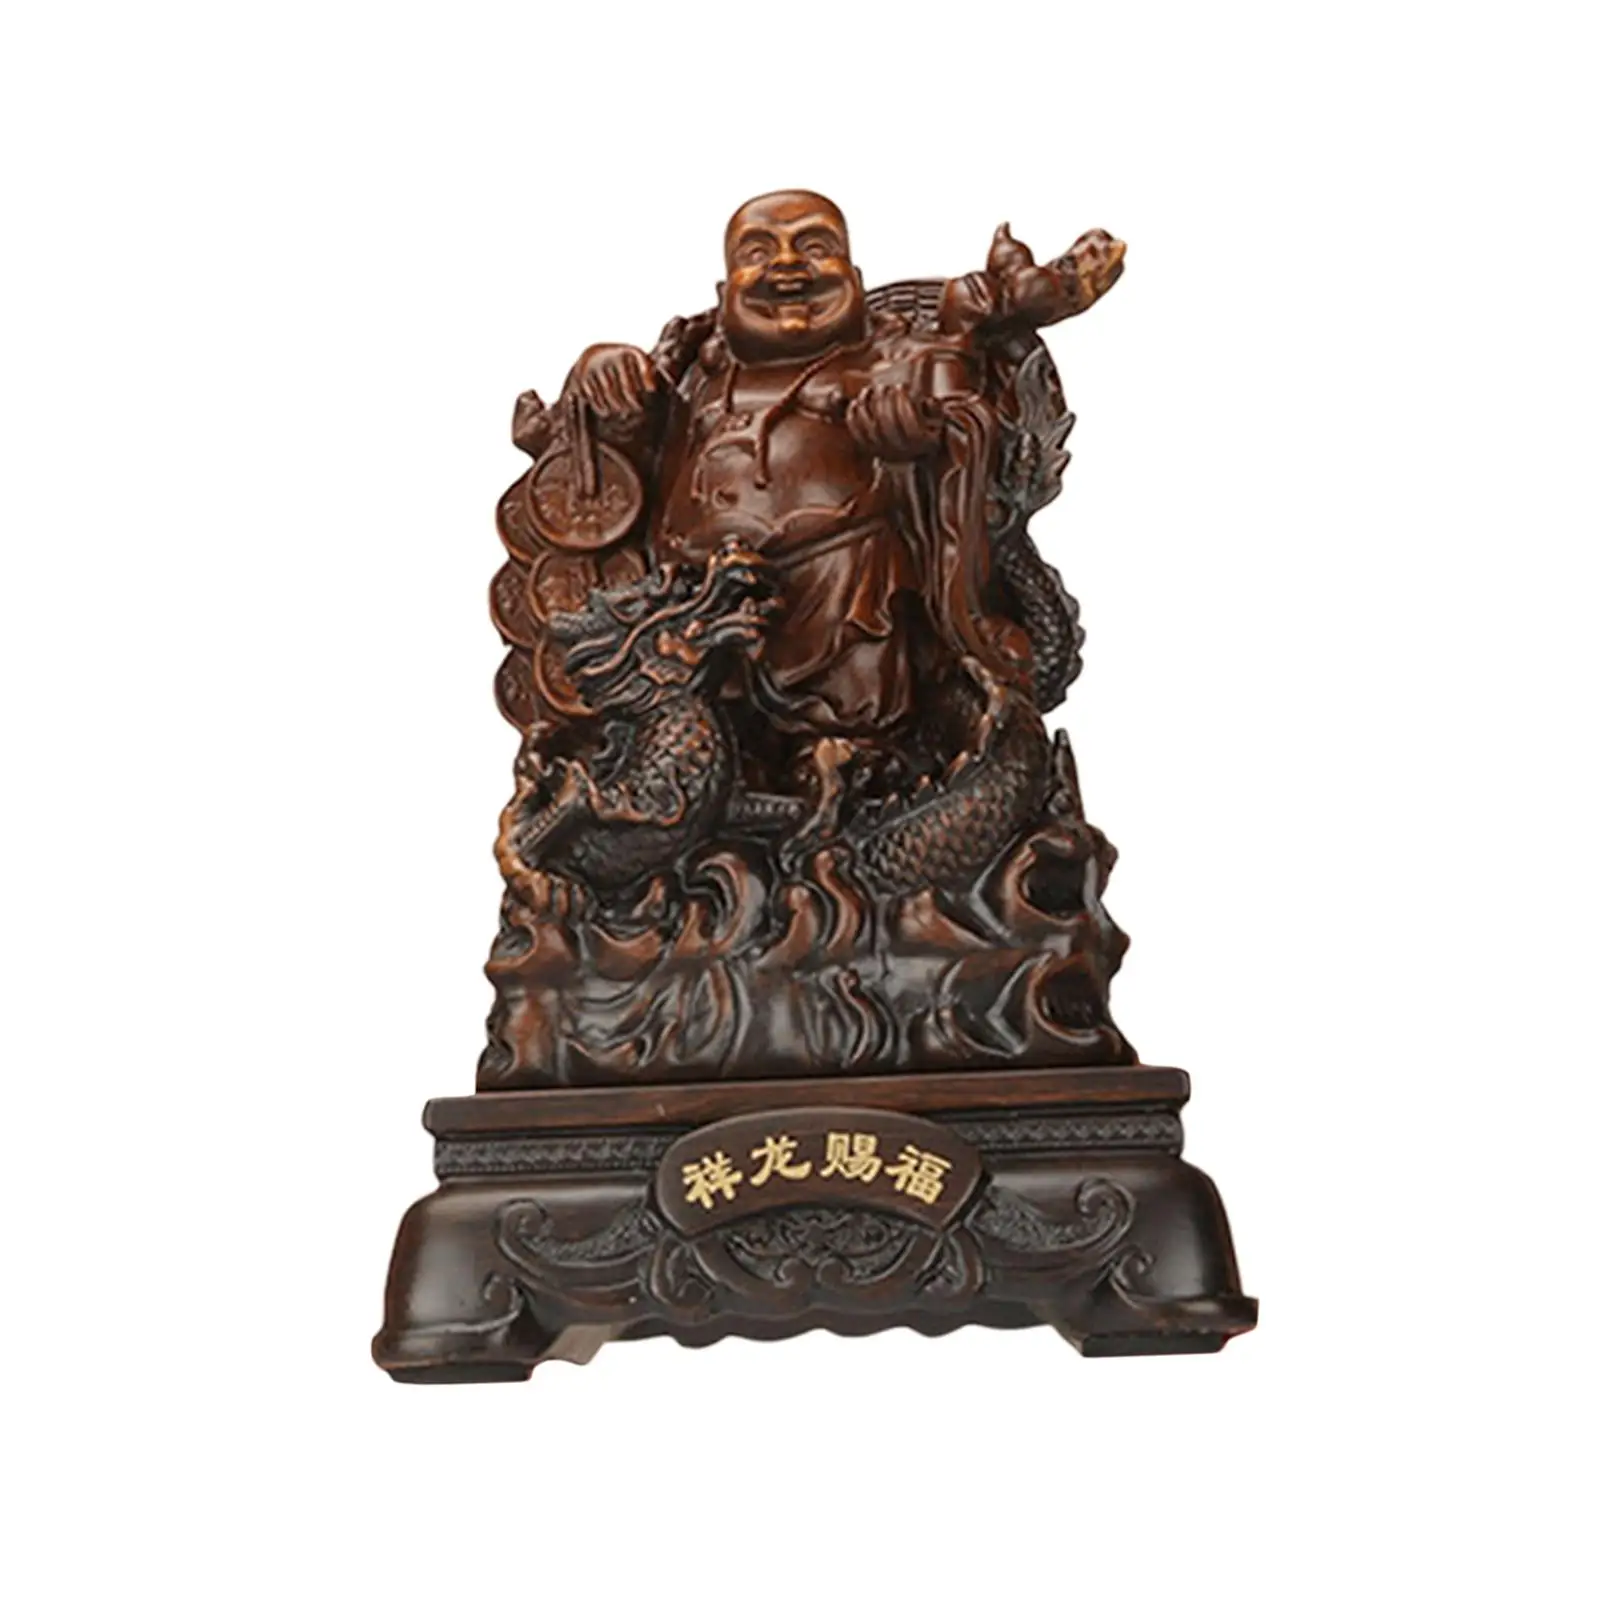 Buddha Sculpture Artwork Smiling Resin Feng Shui Chinese Buddha Statue Buddha Figurine for Car Office Garden Tabletop Decoration